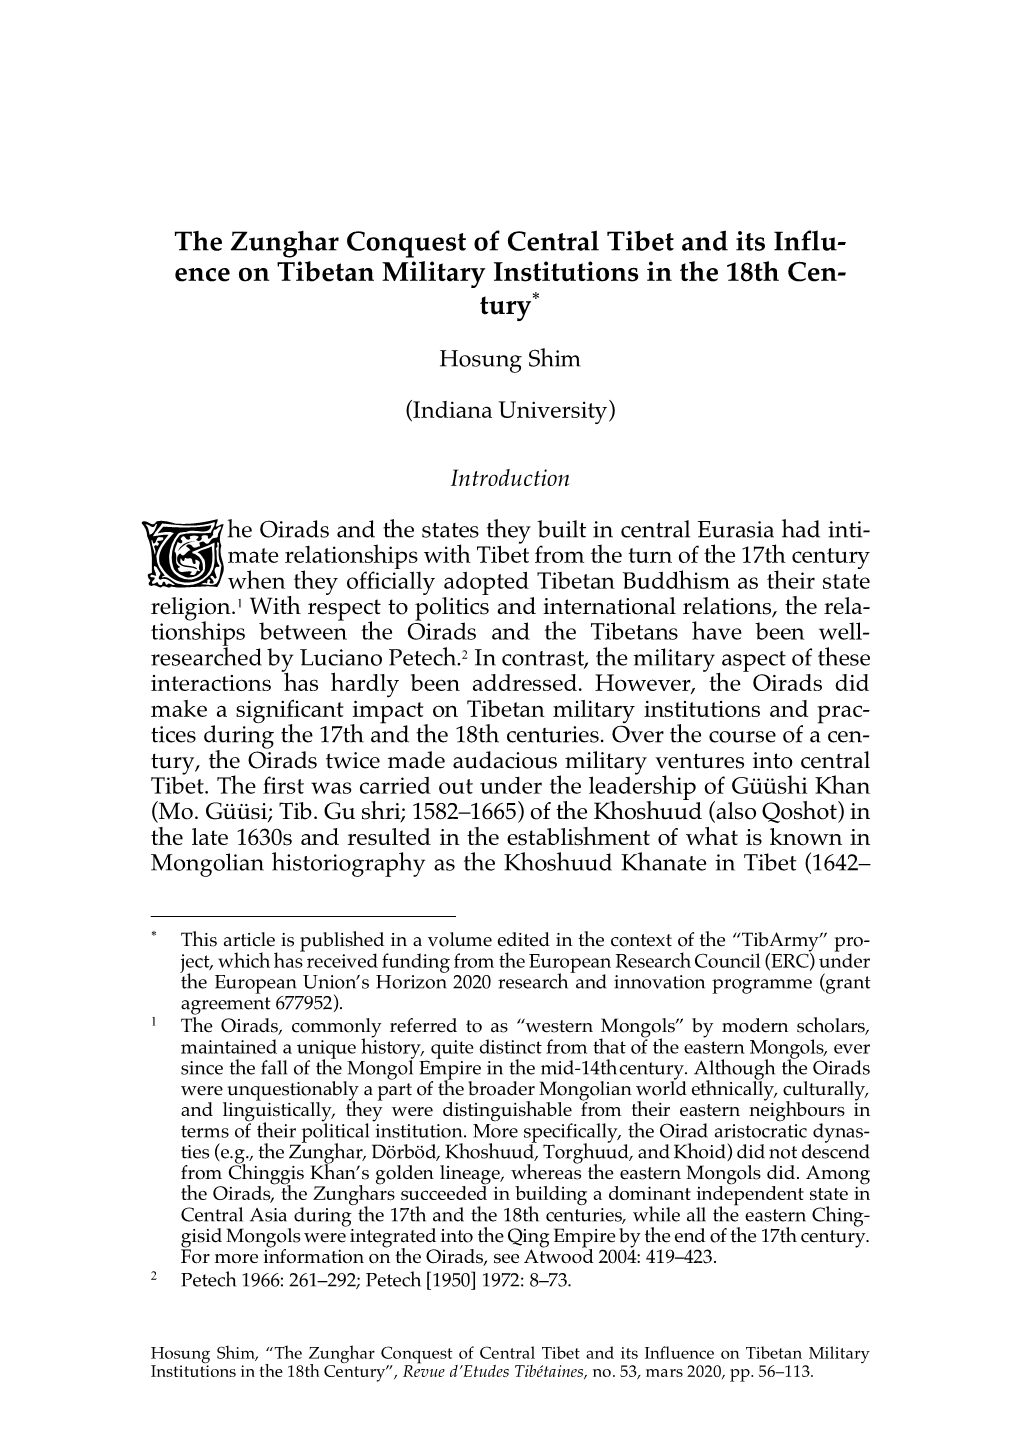 The Zunghar Conquest of Central Tibet and Its Influ- Ence on Tibetan Military Institutions in the 18Th Cen- Tury*